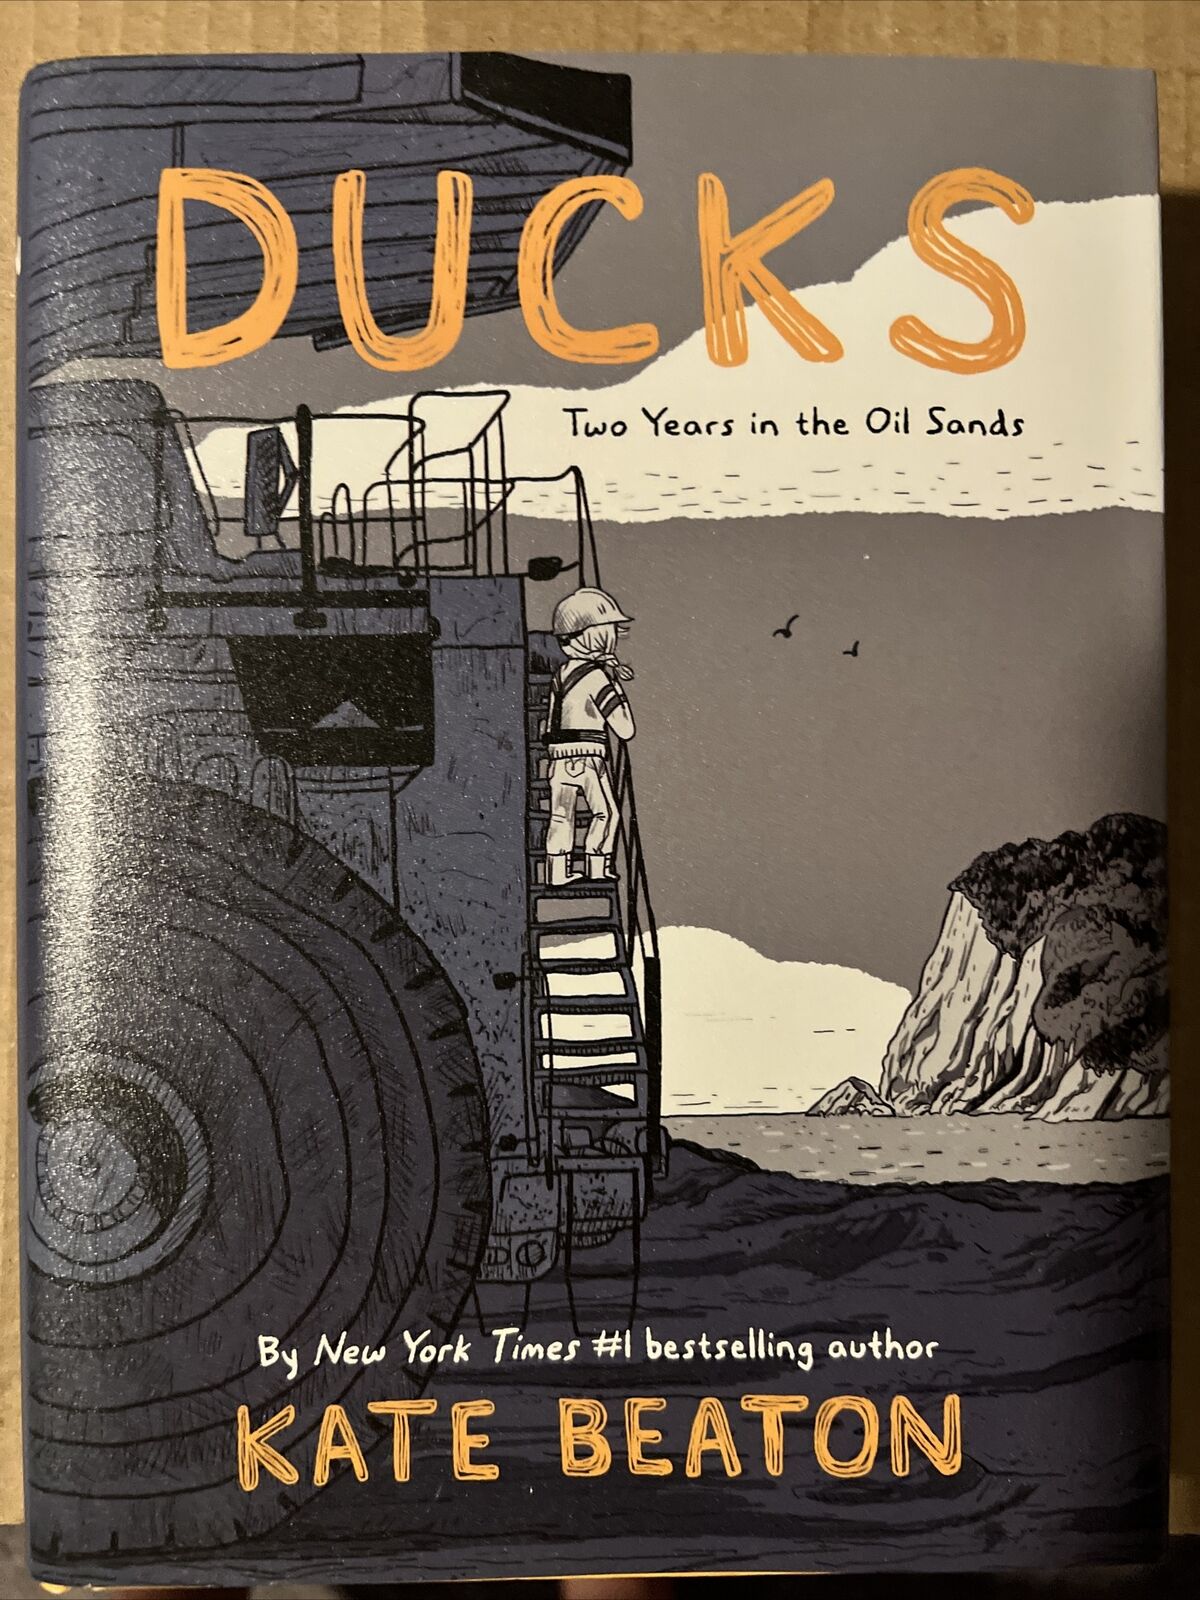 Ducks: Two Years in the Oil Sands by Kate Beaton Hardcover Graphic Novel 1st ED